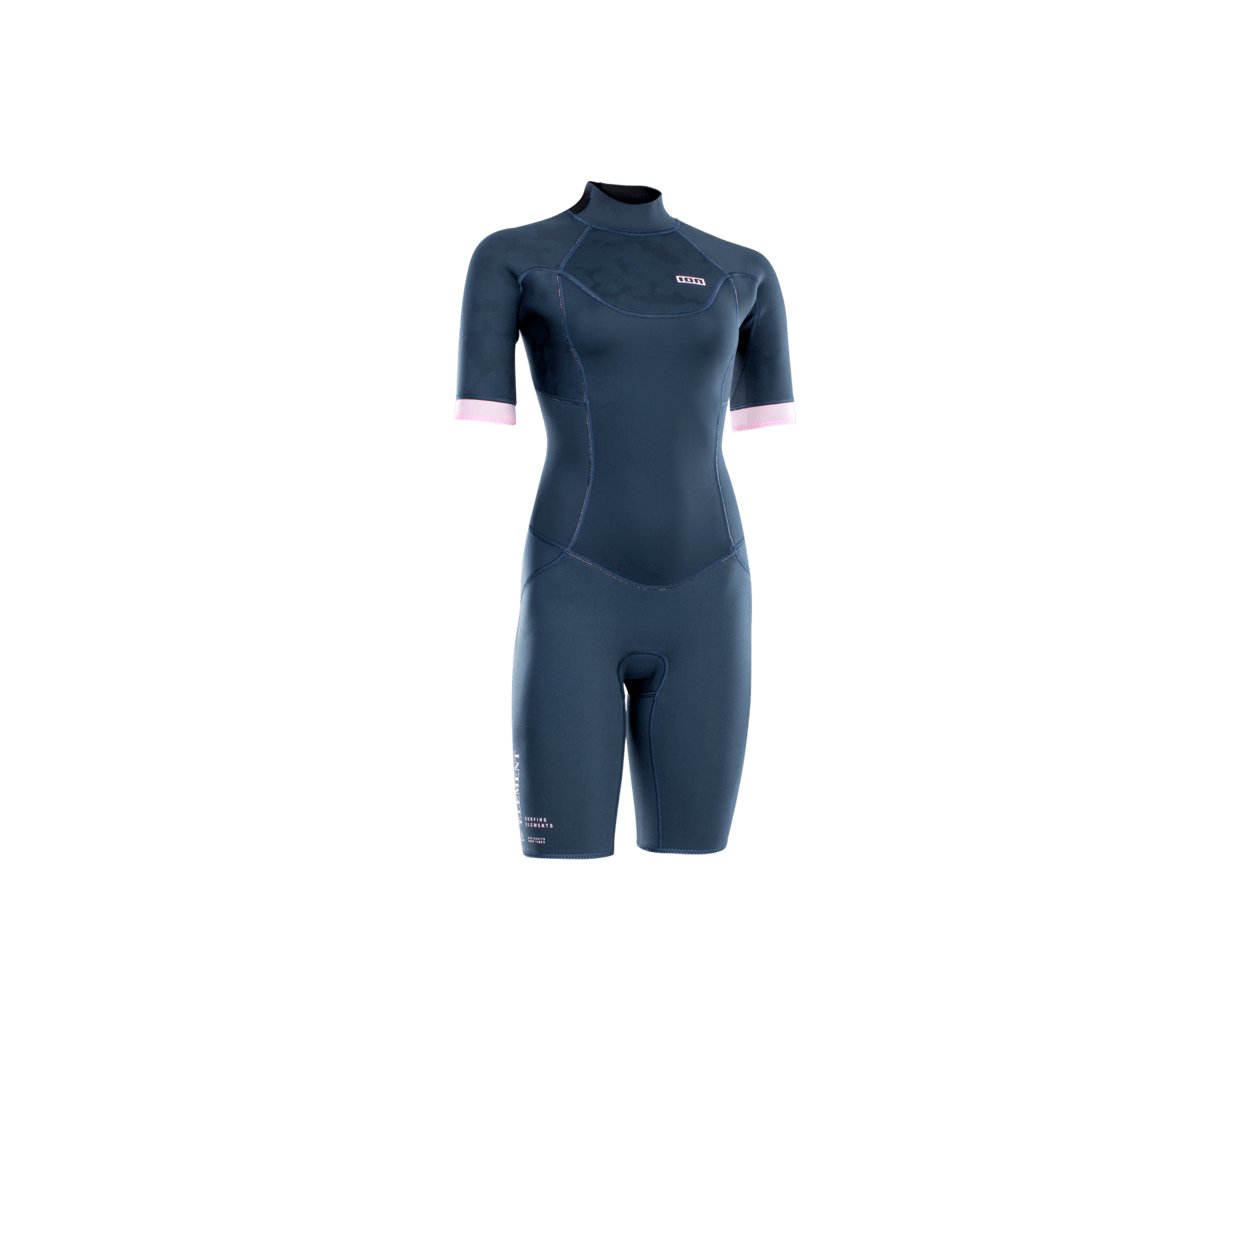 ION Women Wetsuit Element 2/2 Shorty Shortsleeve Back Zip 2022 - Worthing Watersports - 9008415952106 - Wetsuits - ION Water